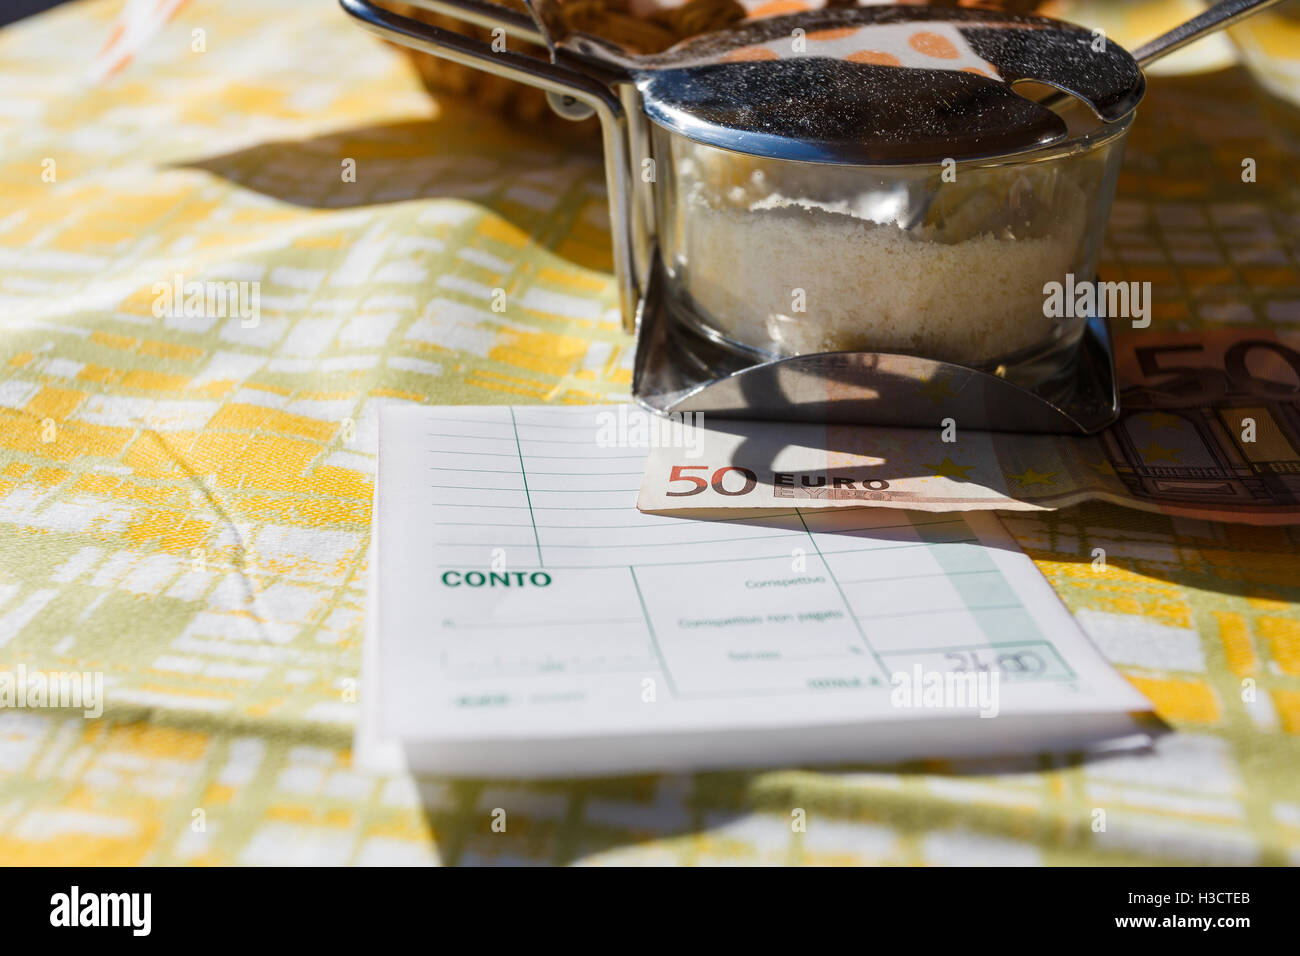 50 Euro to pay for bill on a table in a summer cafe Stock Photo